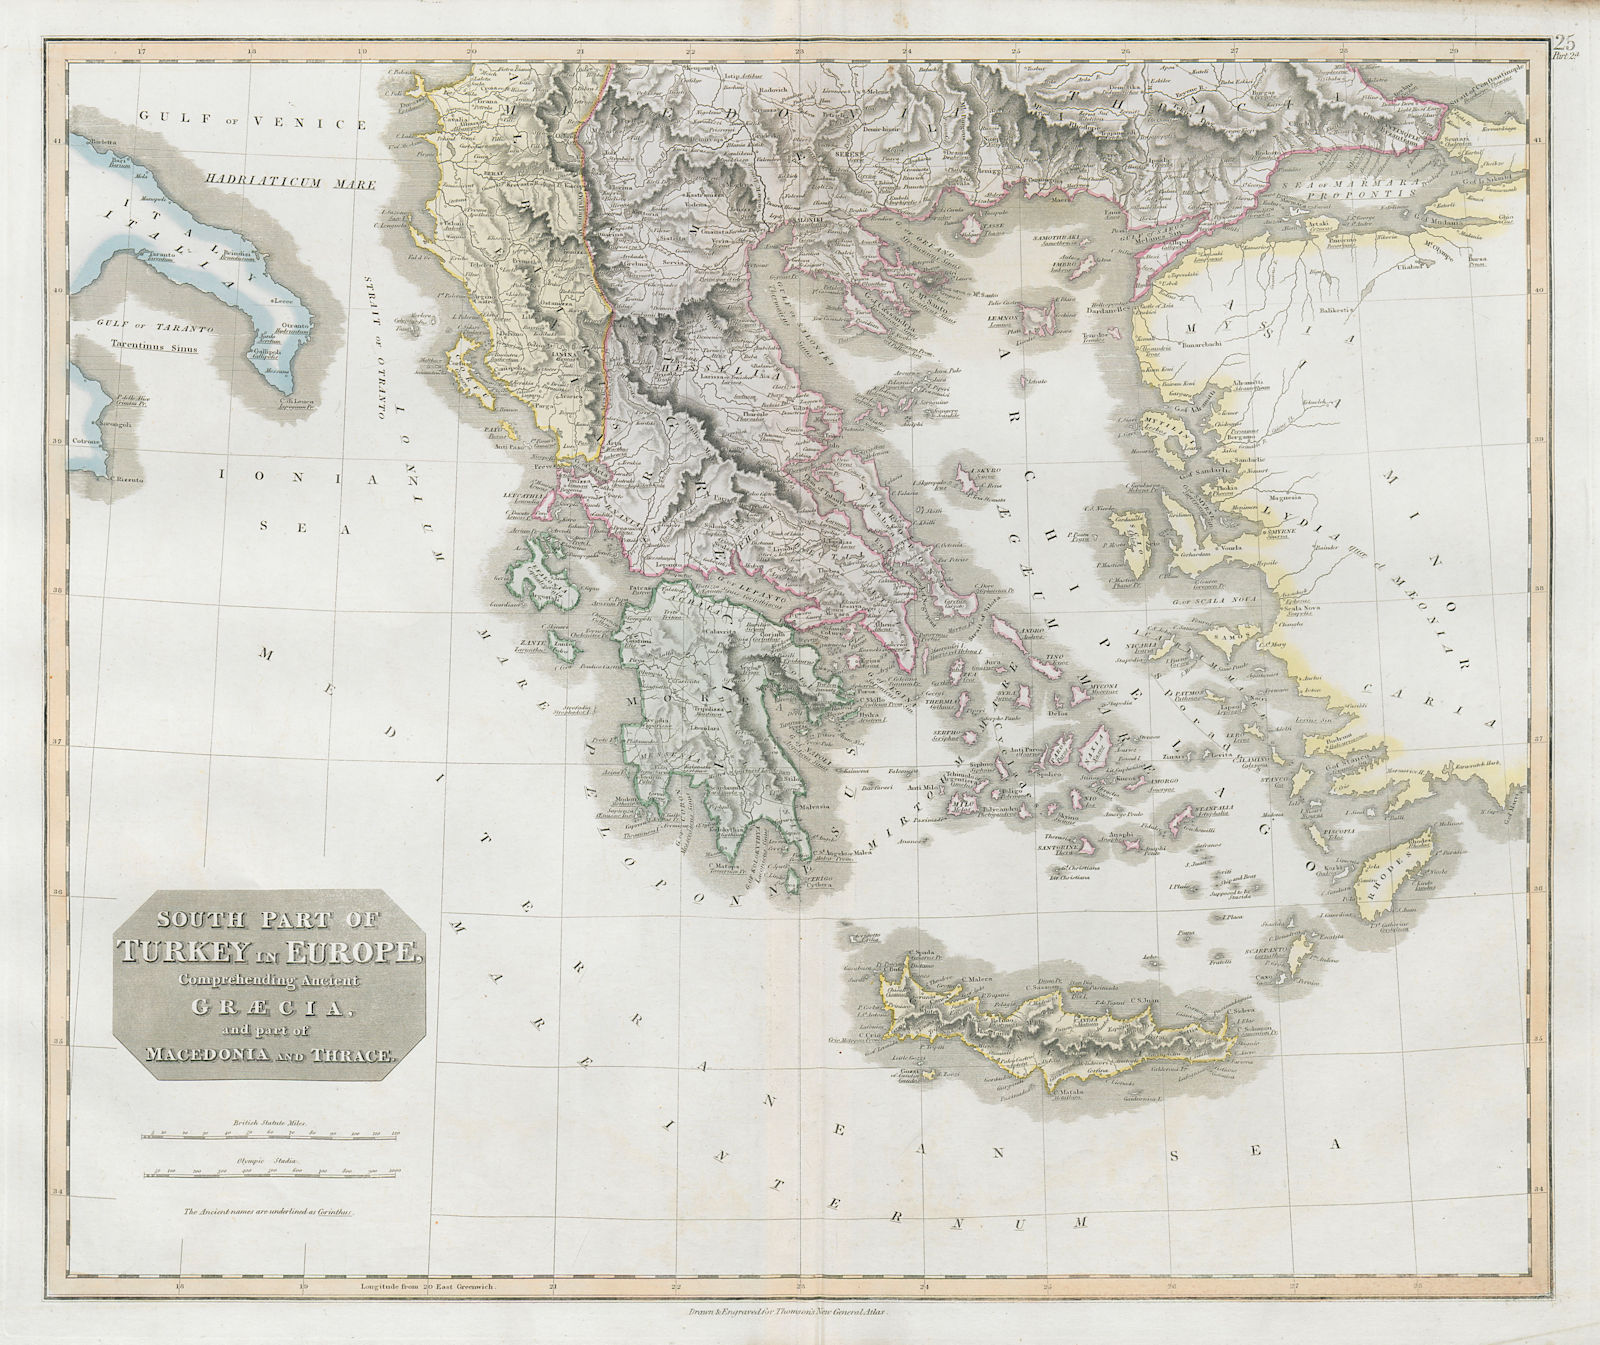 South Part of Turkey in Europe. Greece & Aegean. Albania. THOMSON 1830 old map